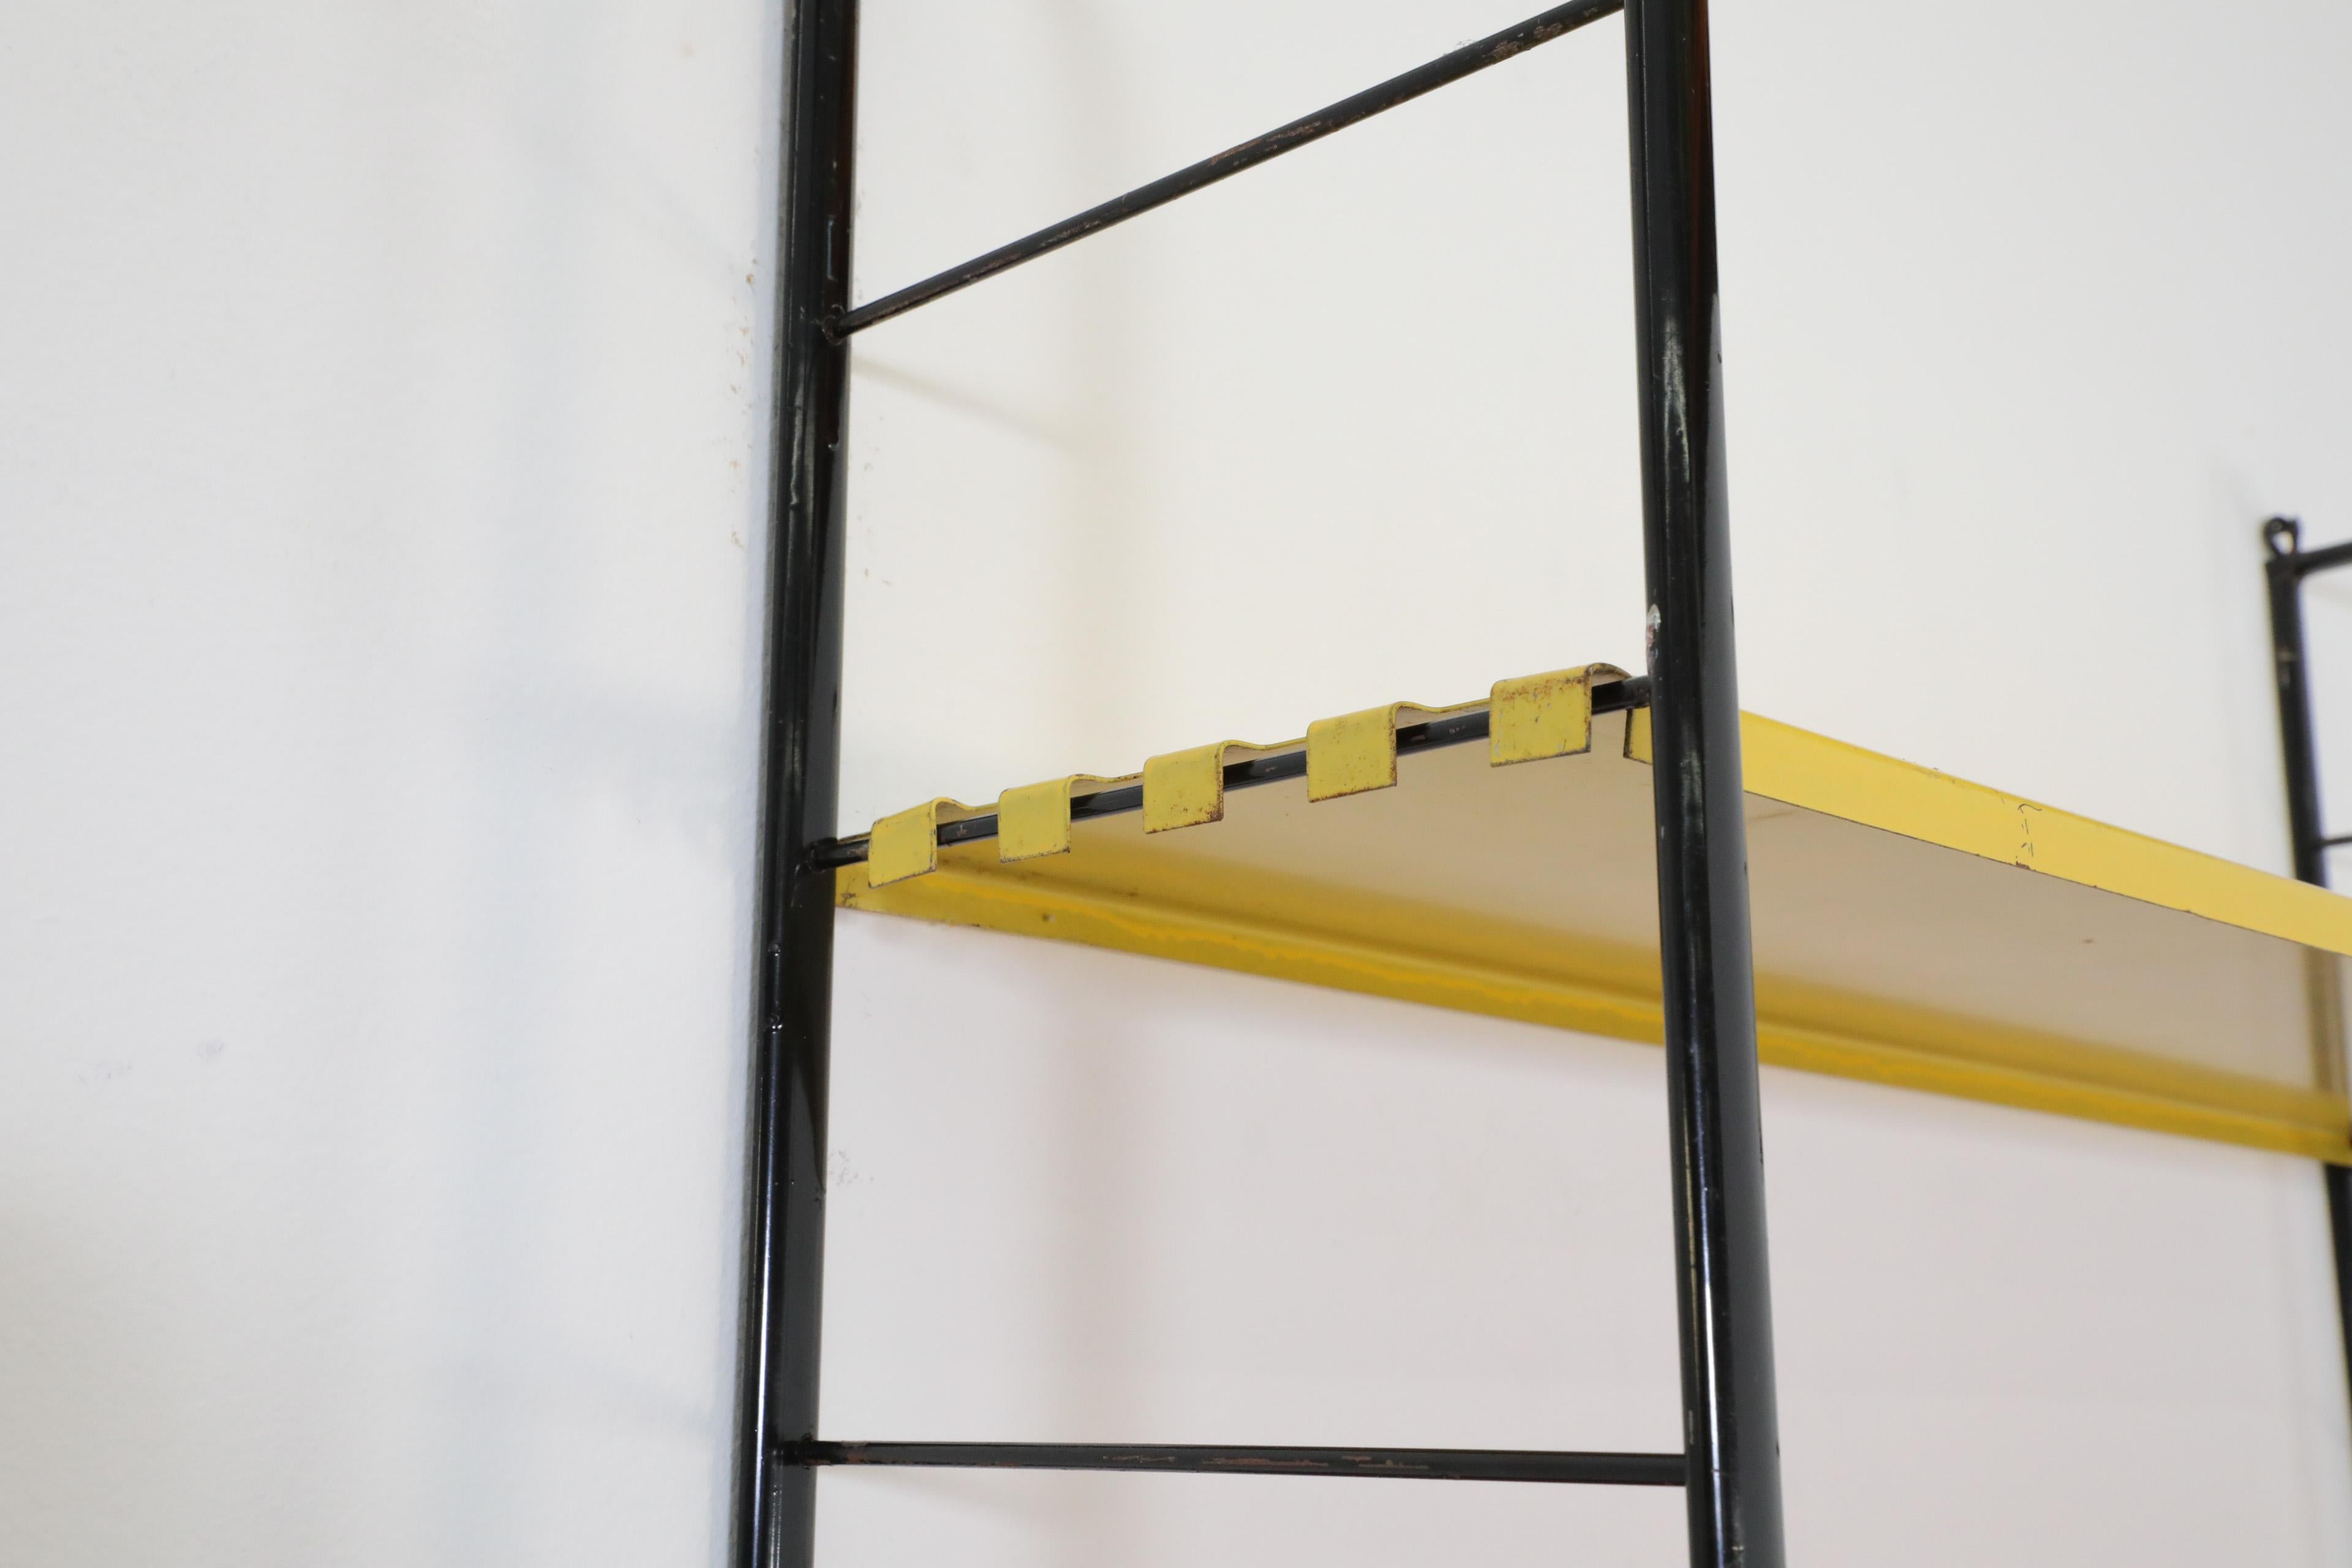 Mid-20th Century Tomado Style Wall Shelving Unit w/ Black Frame and Yellow, Red, & Blue Shelves For Sale